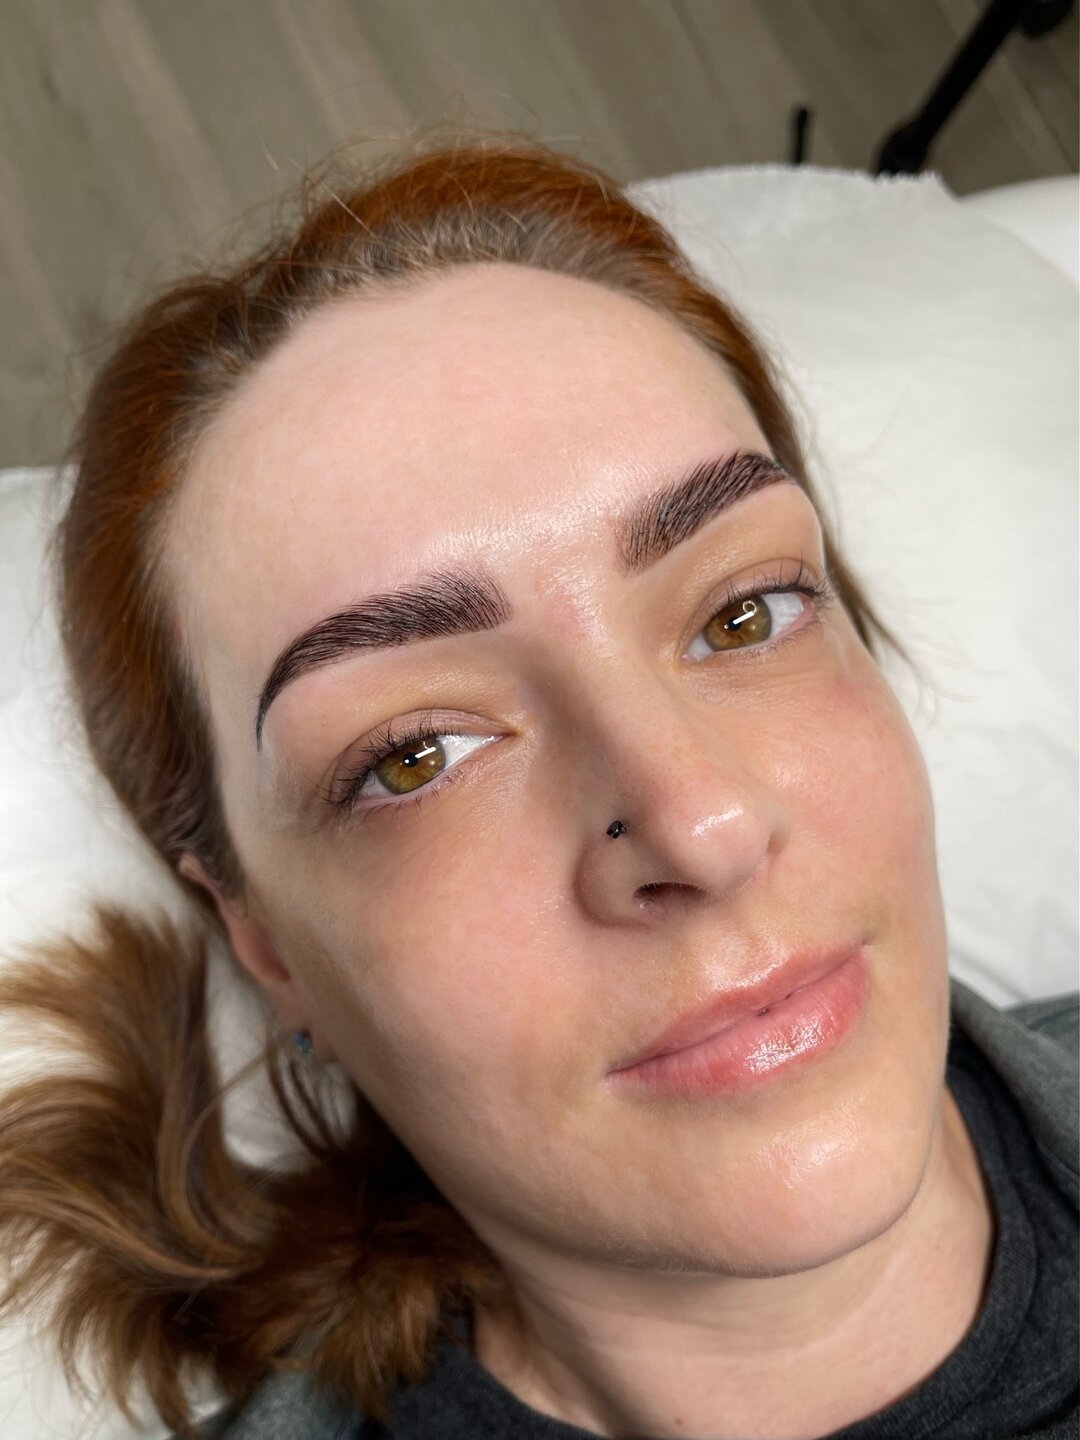 𝐁𝐫𝐨𝐰 𝐋𝐚𝐦𝐢𝐧𝐚𝐭𝐢𝐨𝐧 𝐚𝐧𝐝 𝐓𝐢𝐧𝐭 

Are you sick of spending precious time each morning trying to tame your unruly brows? 

Look no further than brow lamination and brow tinting for a hassle-free routine that will have your brows looking 